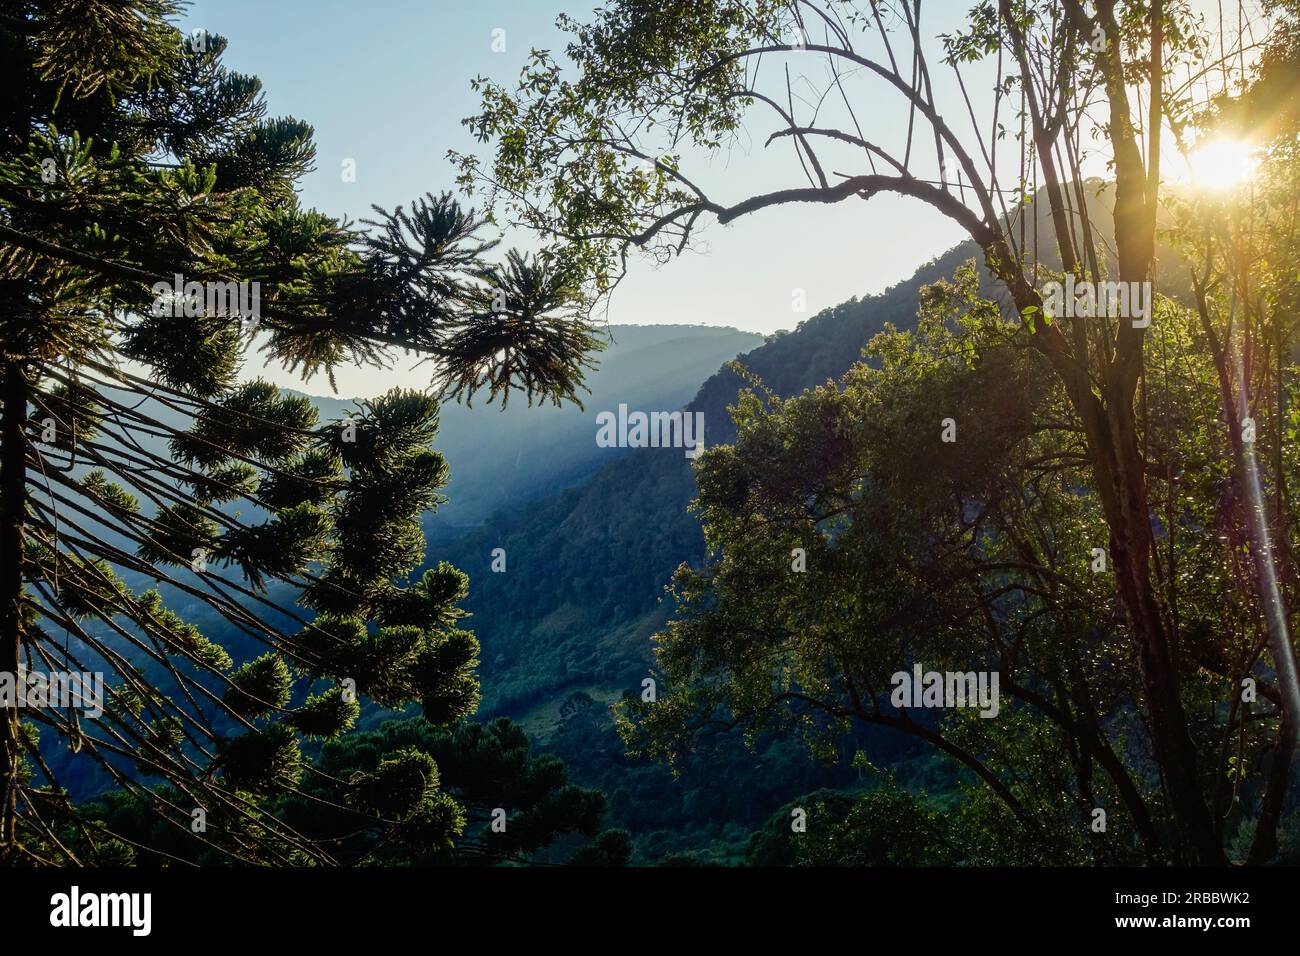 Tree crowns of Araucaria, aka Araucaria angustifolia, in forest of southern Brazil. Stock Photo